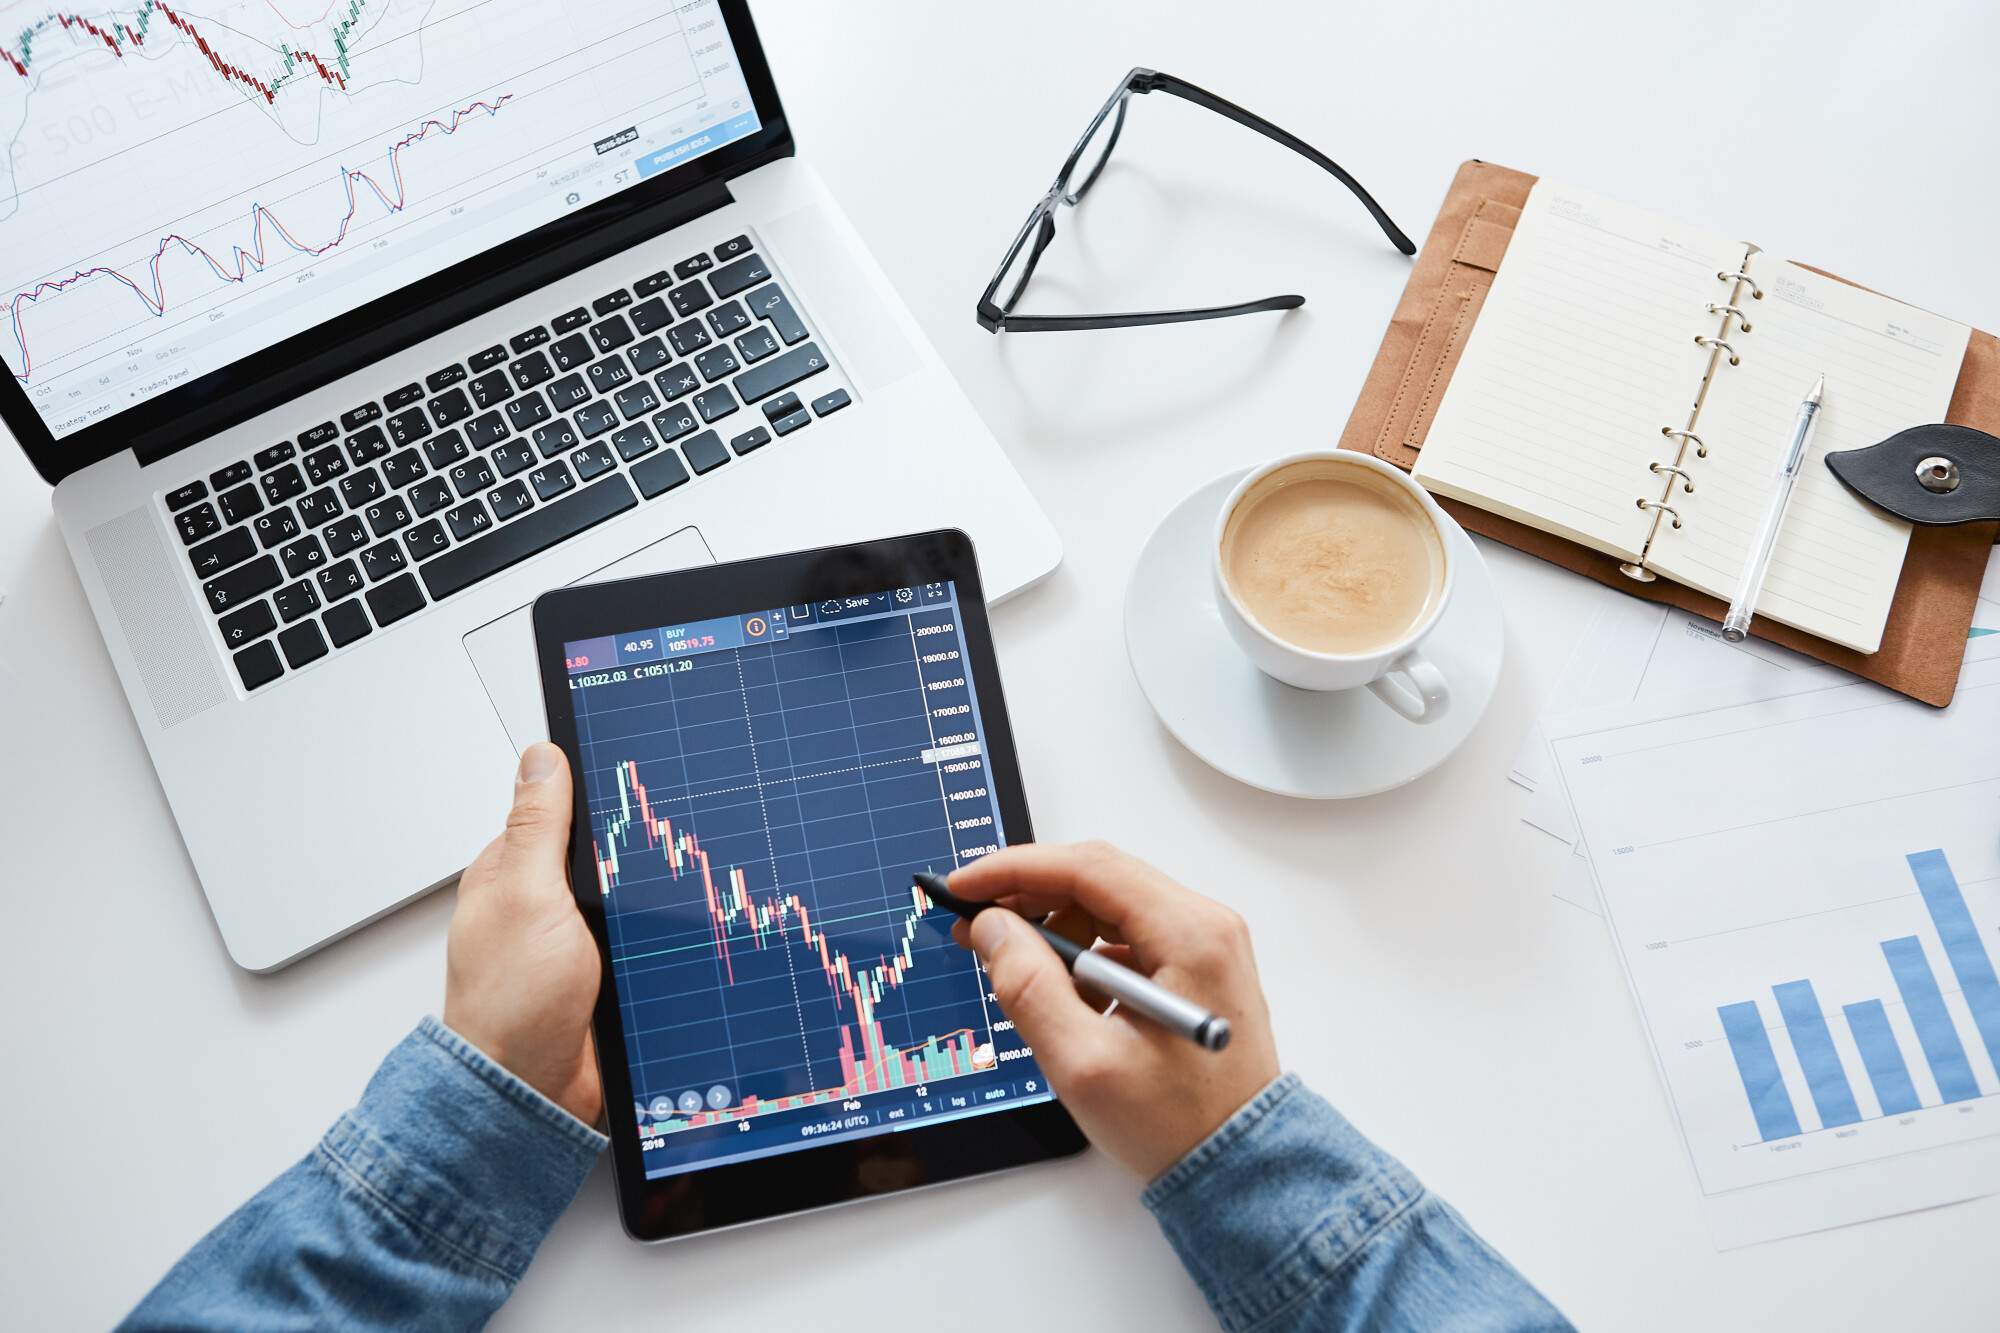 5 Proven Stock Trading Strategies to Adopt in 2022